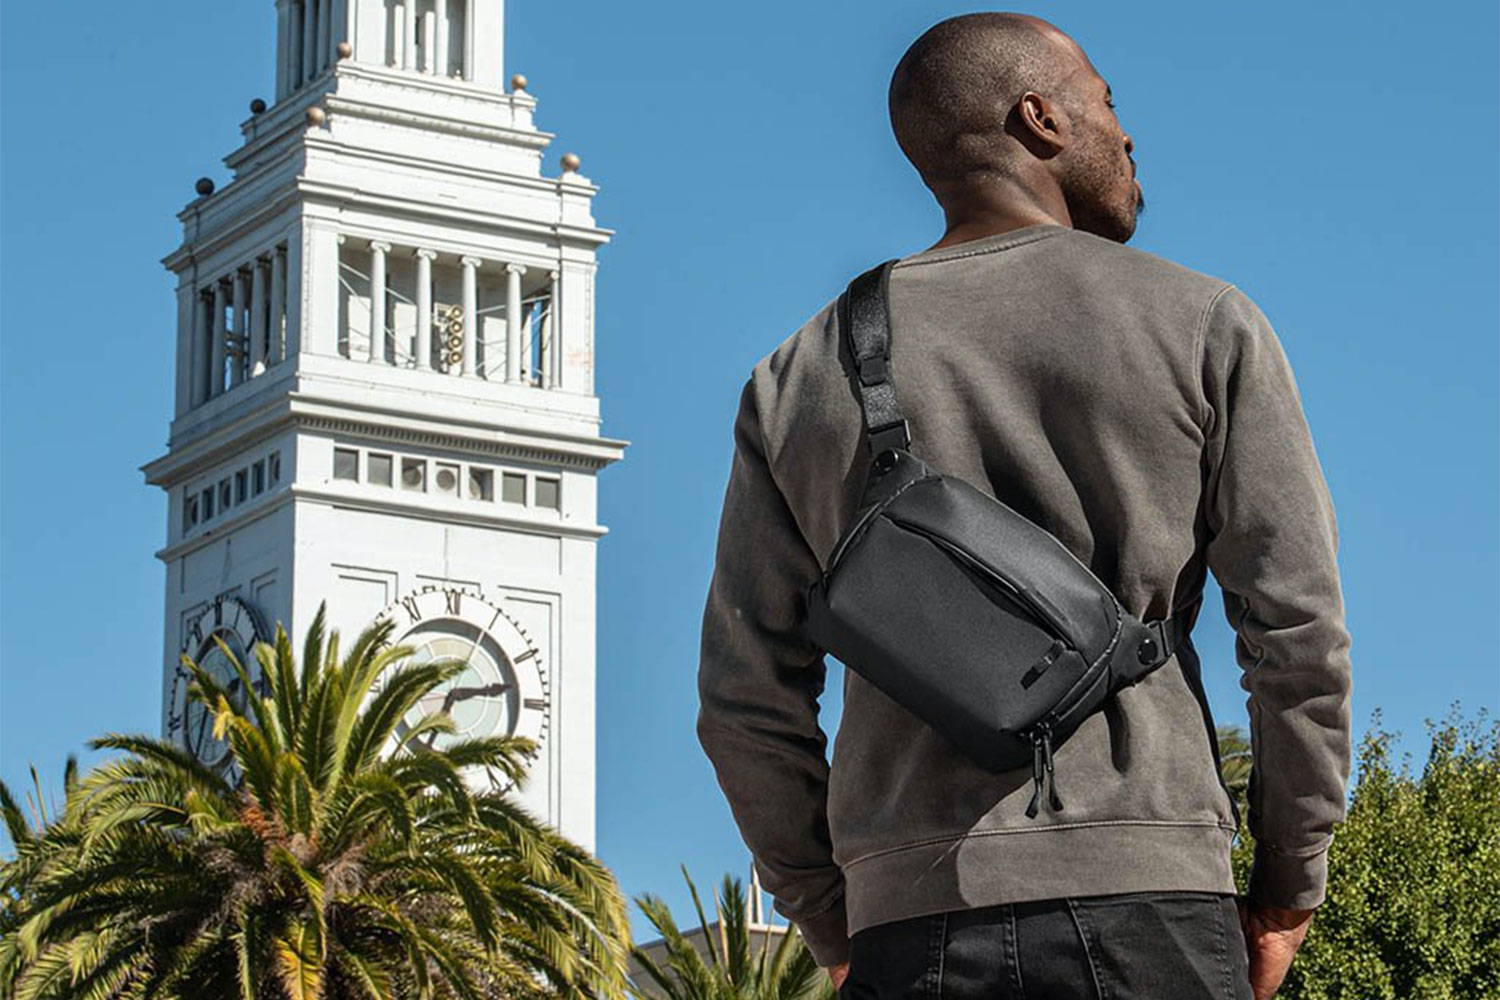 Best Sling Bags For Men To Carry Your Everyday Essentials